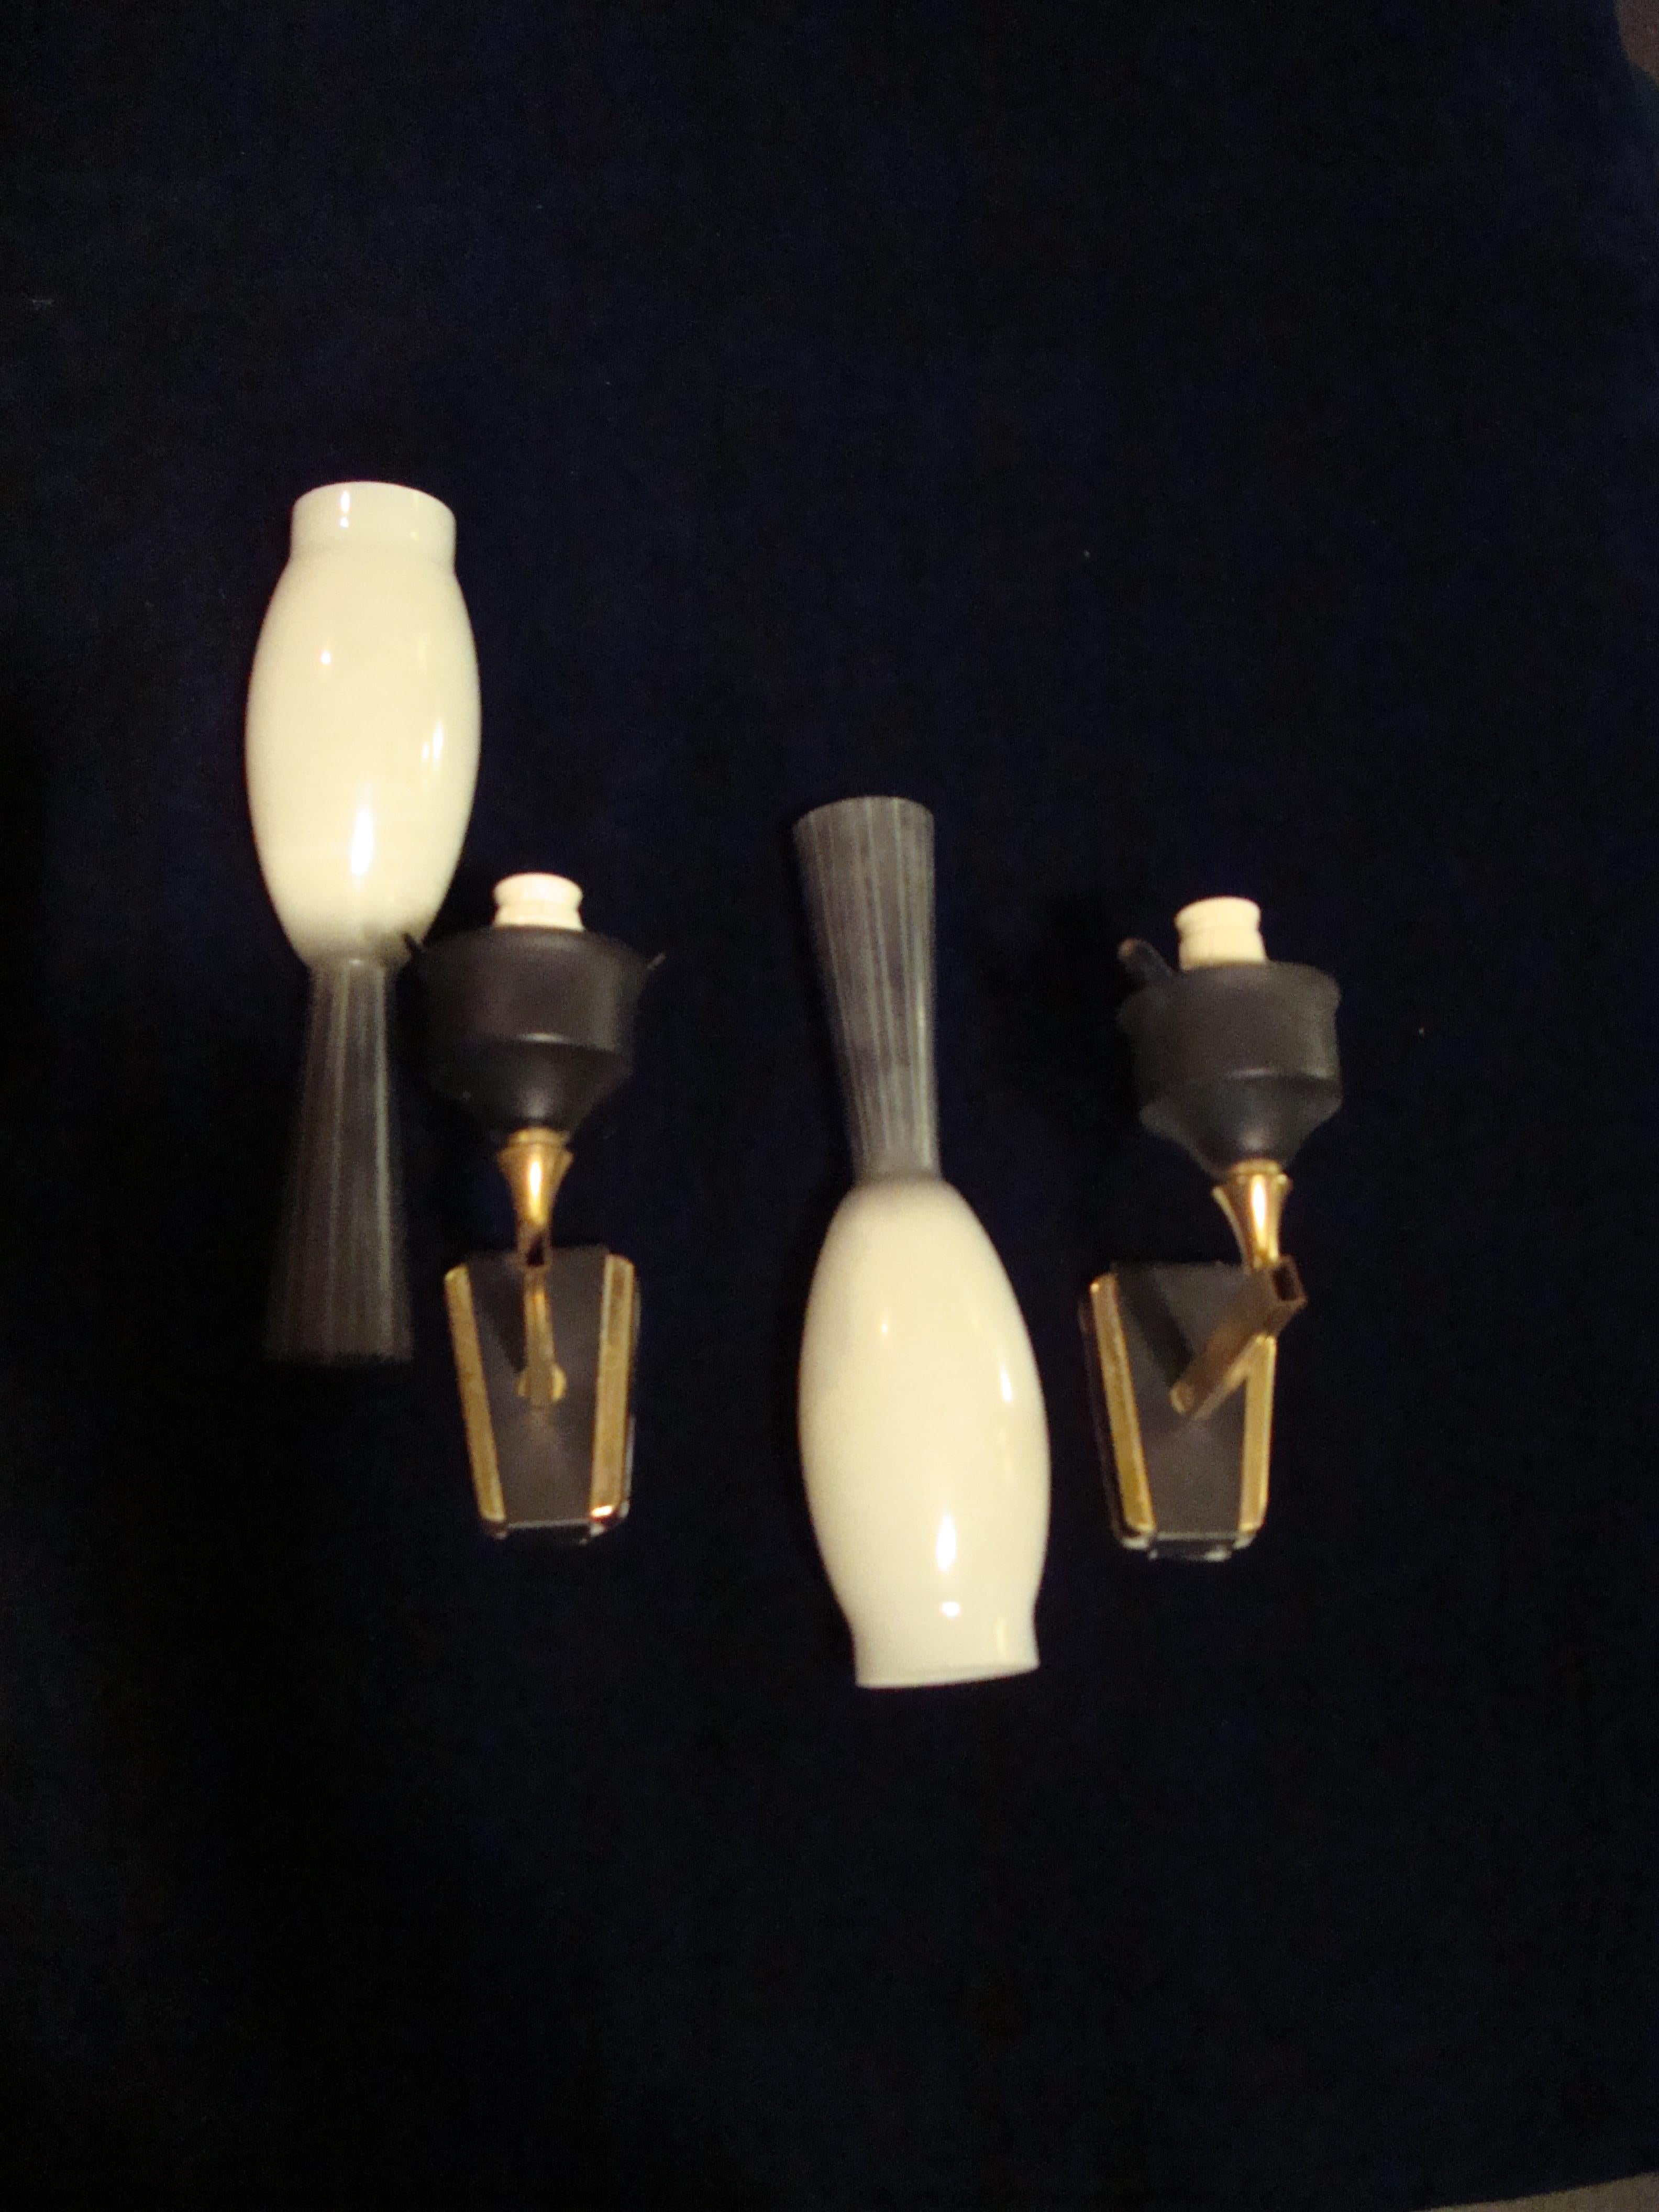 A pair of mid-20th century opal black and white glass wall sconces, the brass arm part black painted.